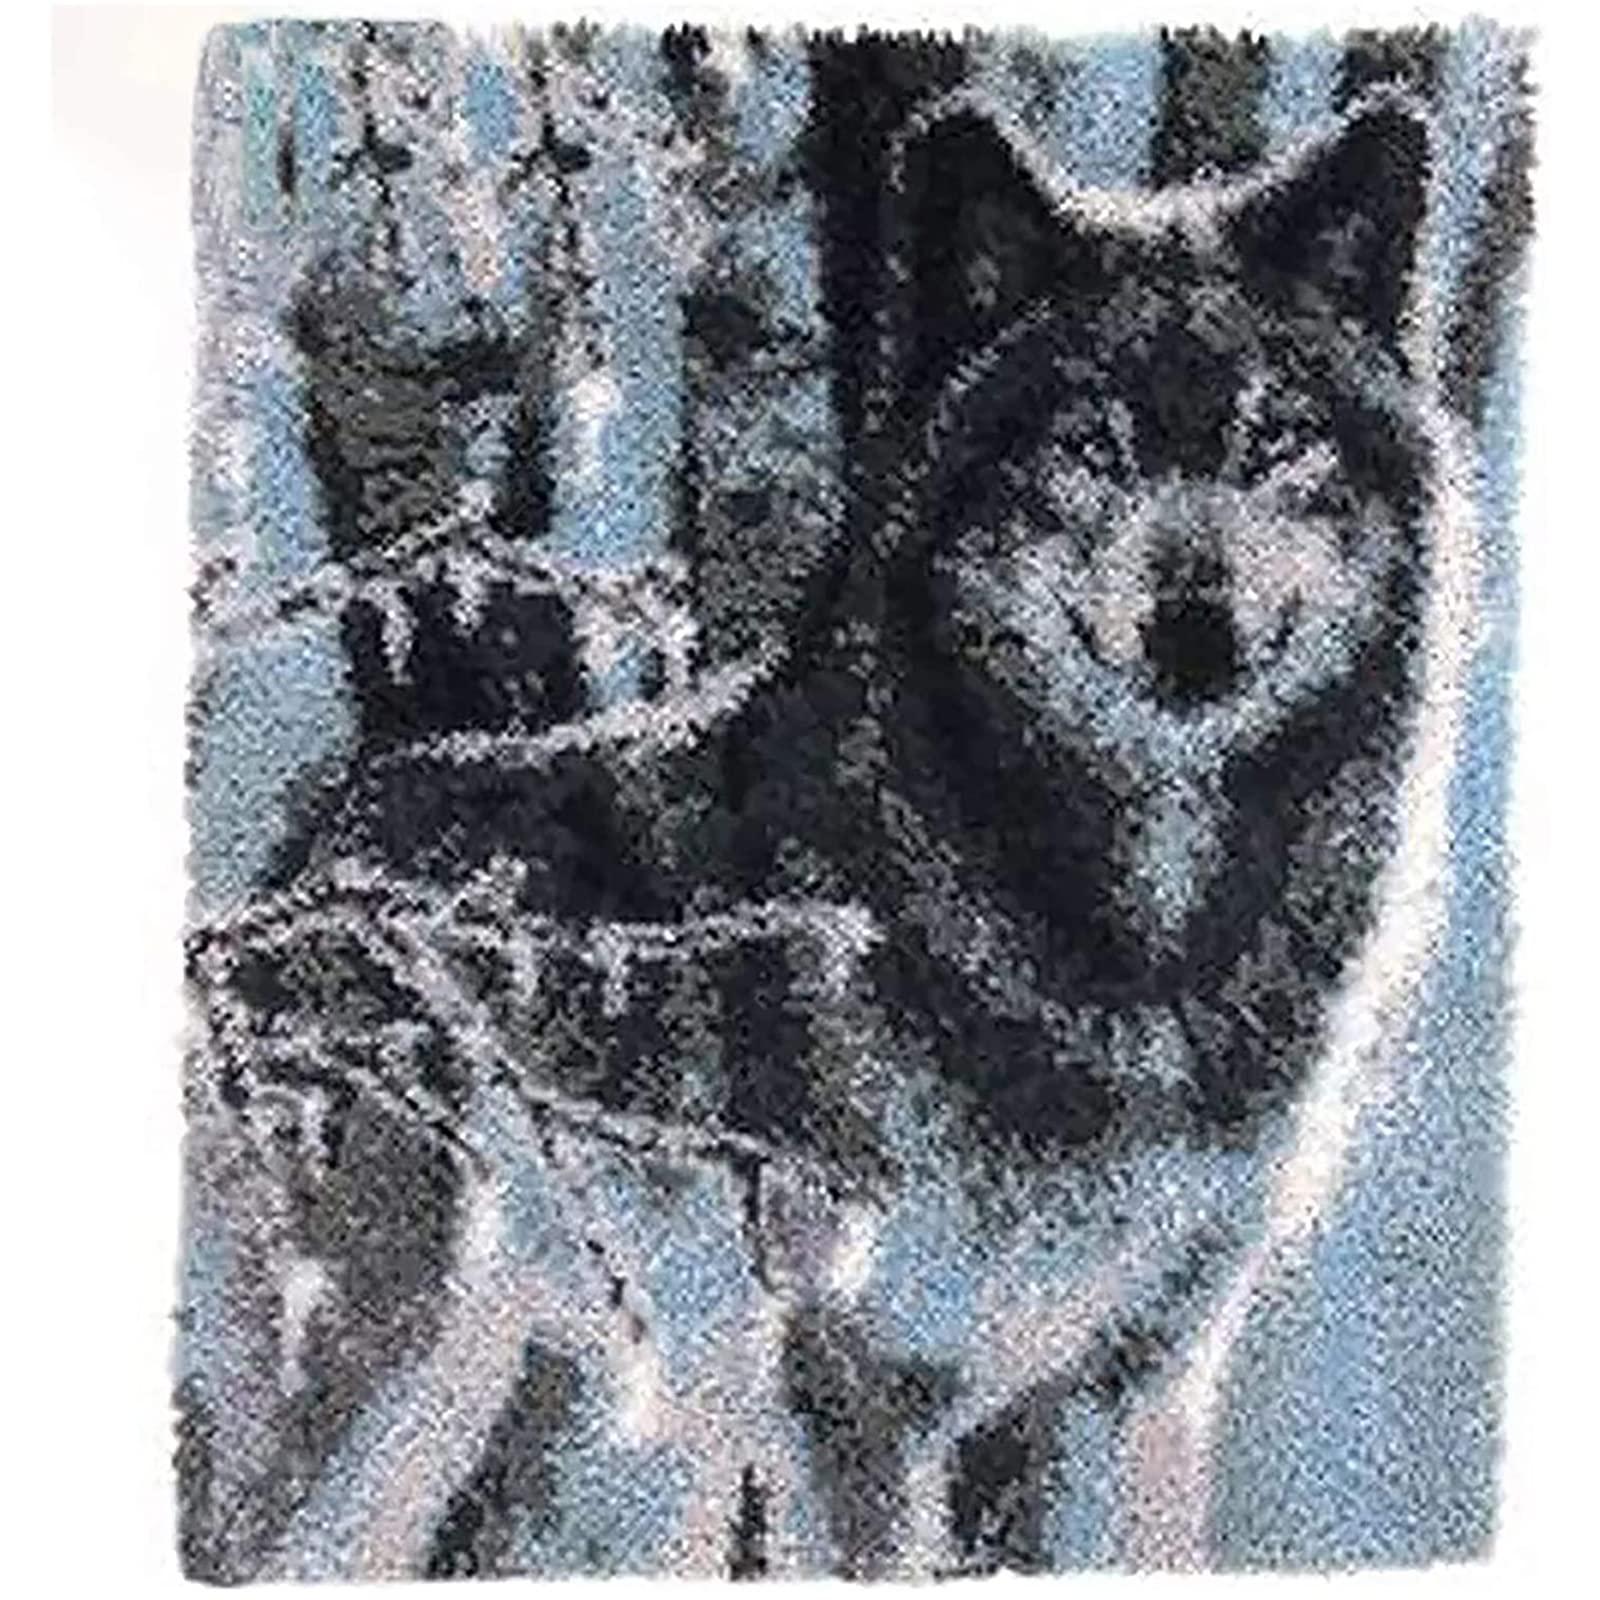 zfflyh large latch hook kits for adults rug, 3d tapestry yarn needlework  cushion making crafts, snow wolf (43x34.5inch/109x88